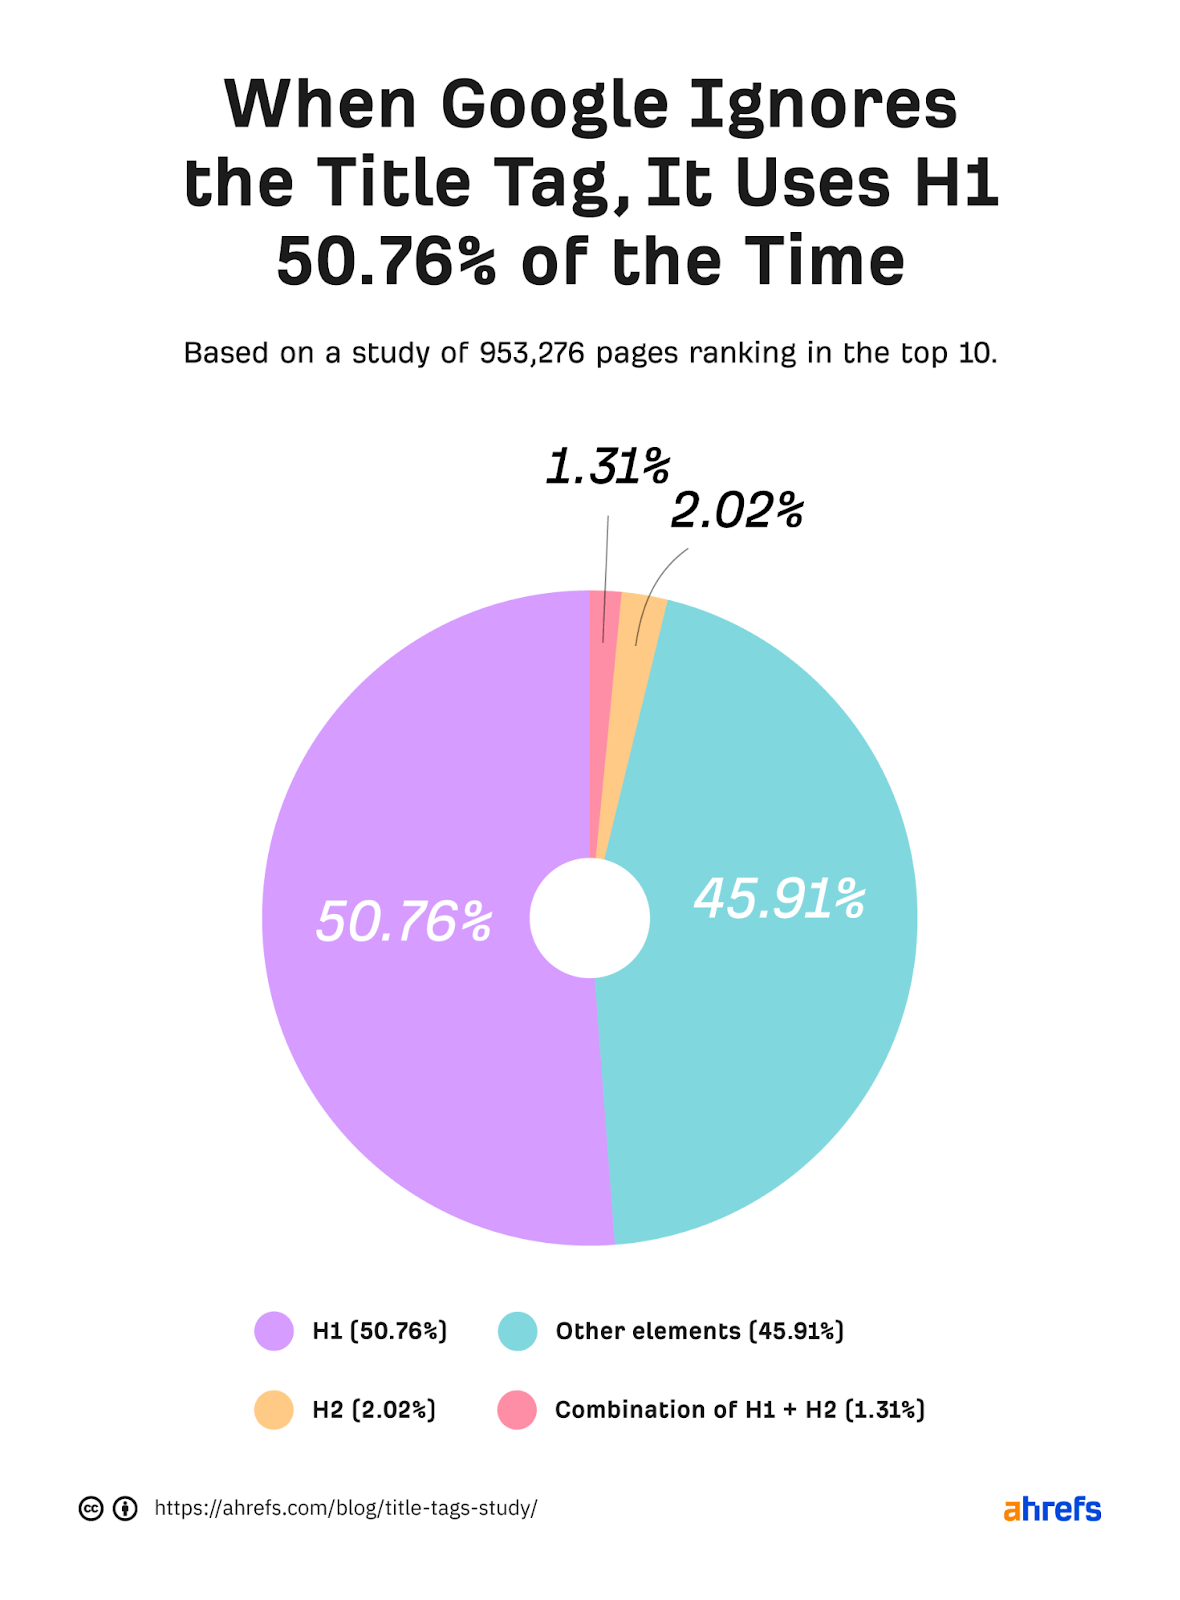 Pie chart showing Google most likely uses H1 when it ignores title tag